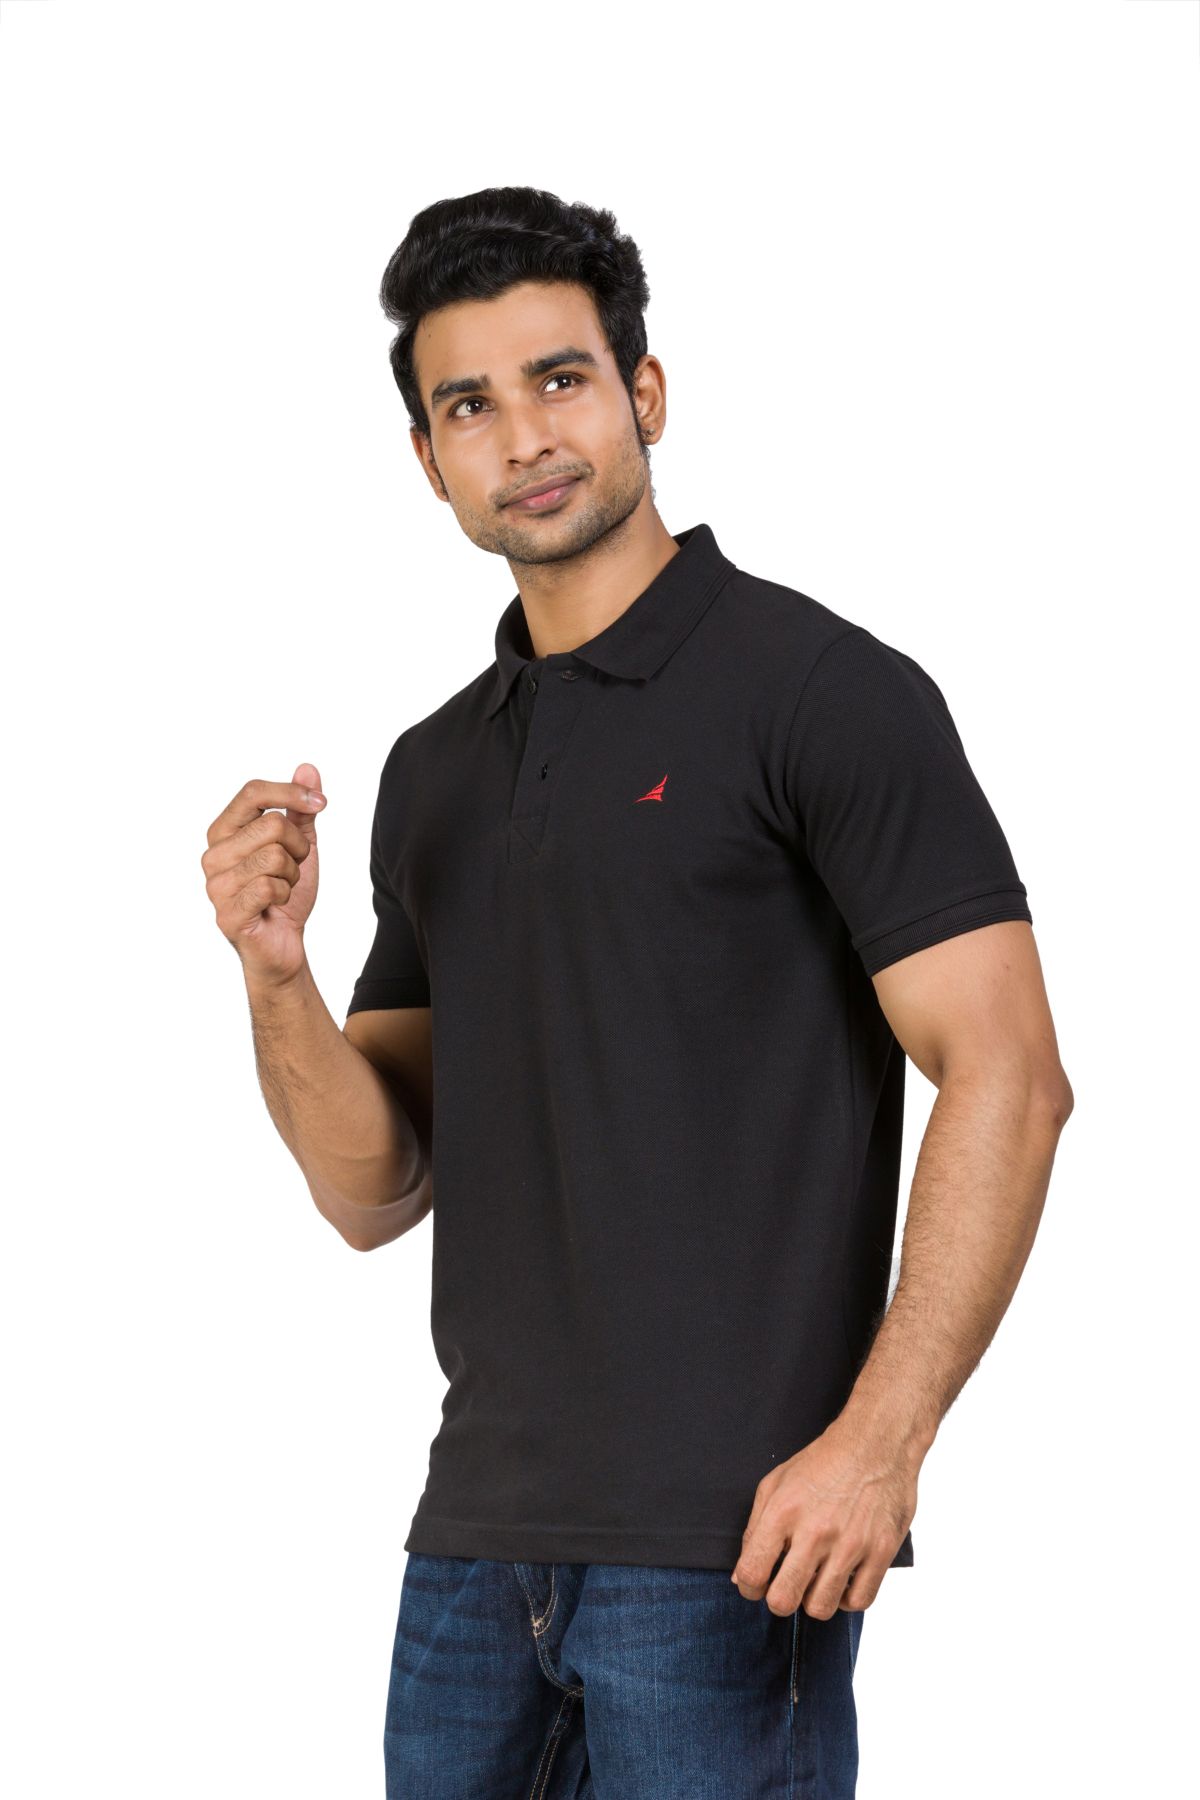 Regular Fit Half Sleeve Black Polo is made of comfortable, cotton blend pique fabric. Suitable for office or for any casual day.